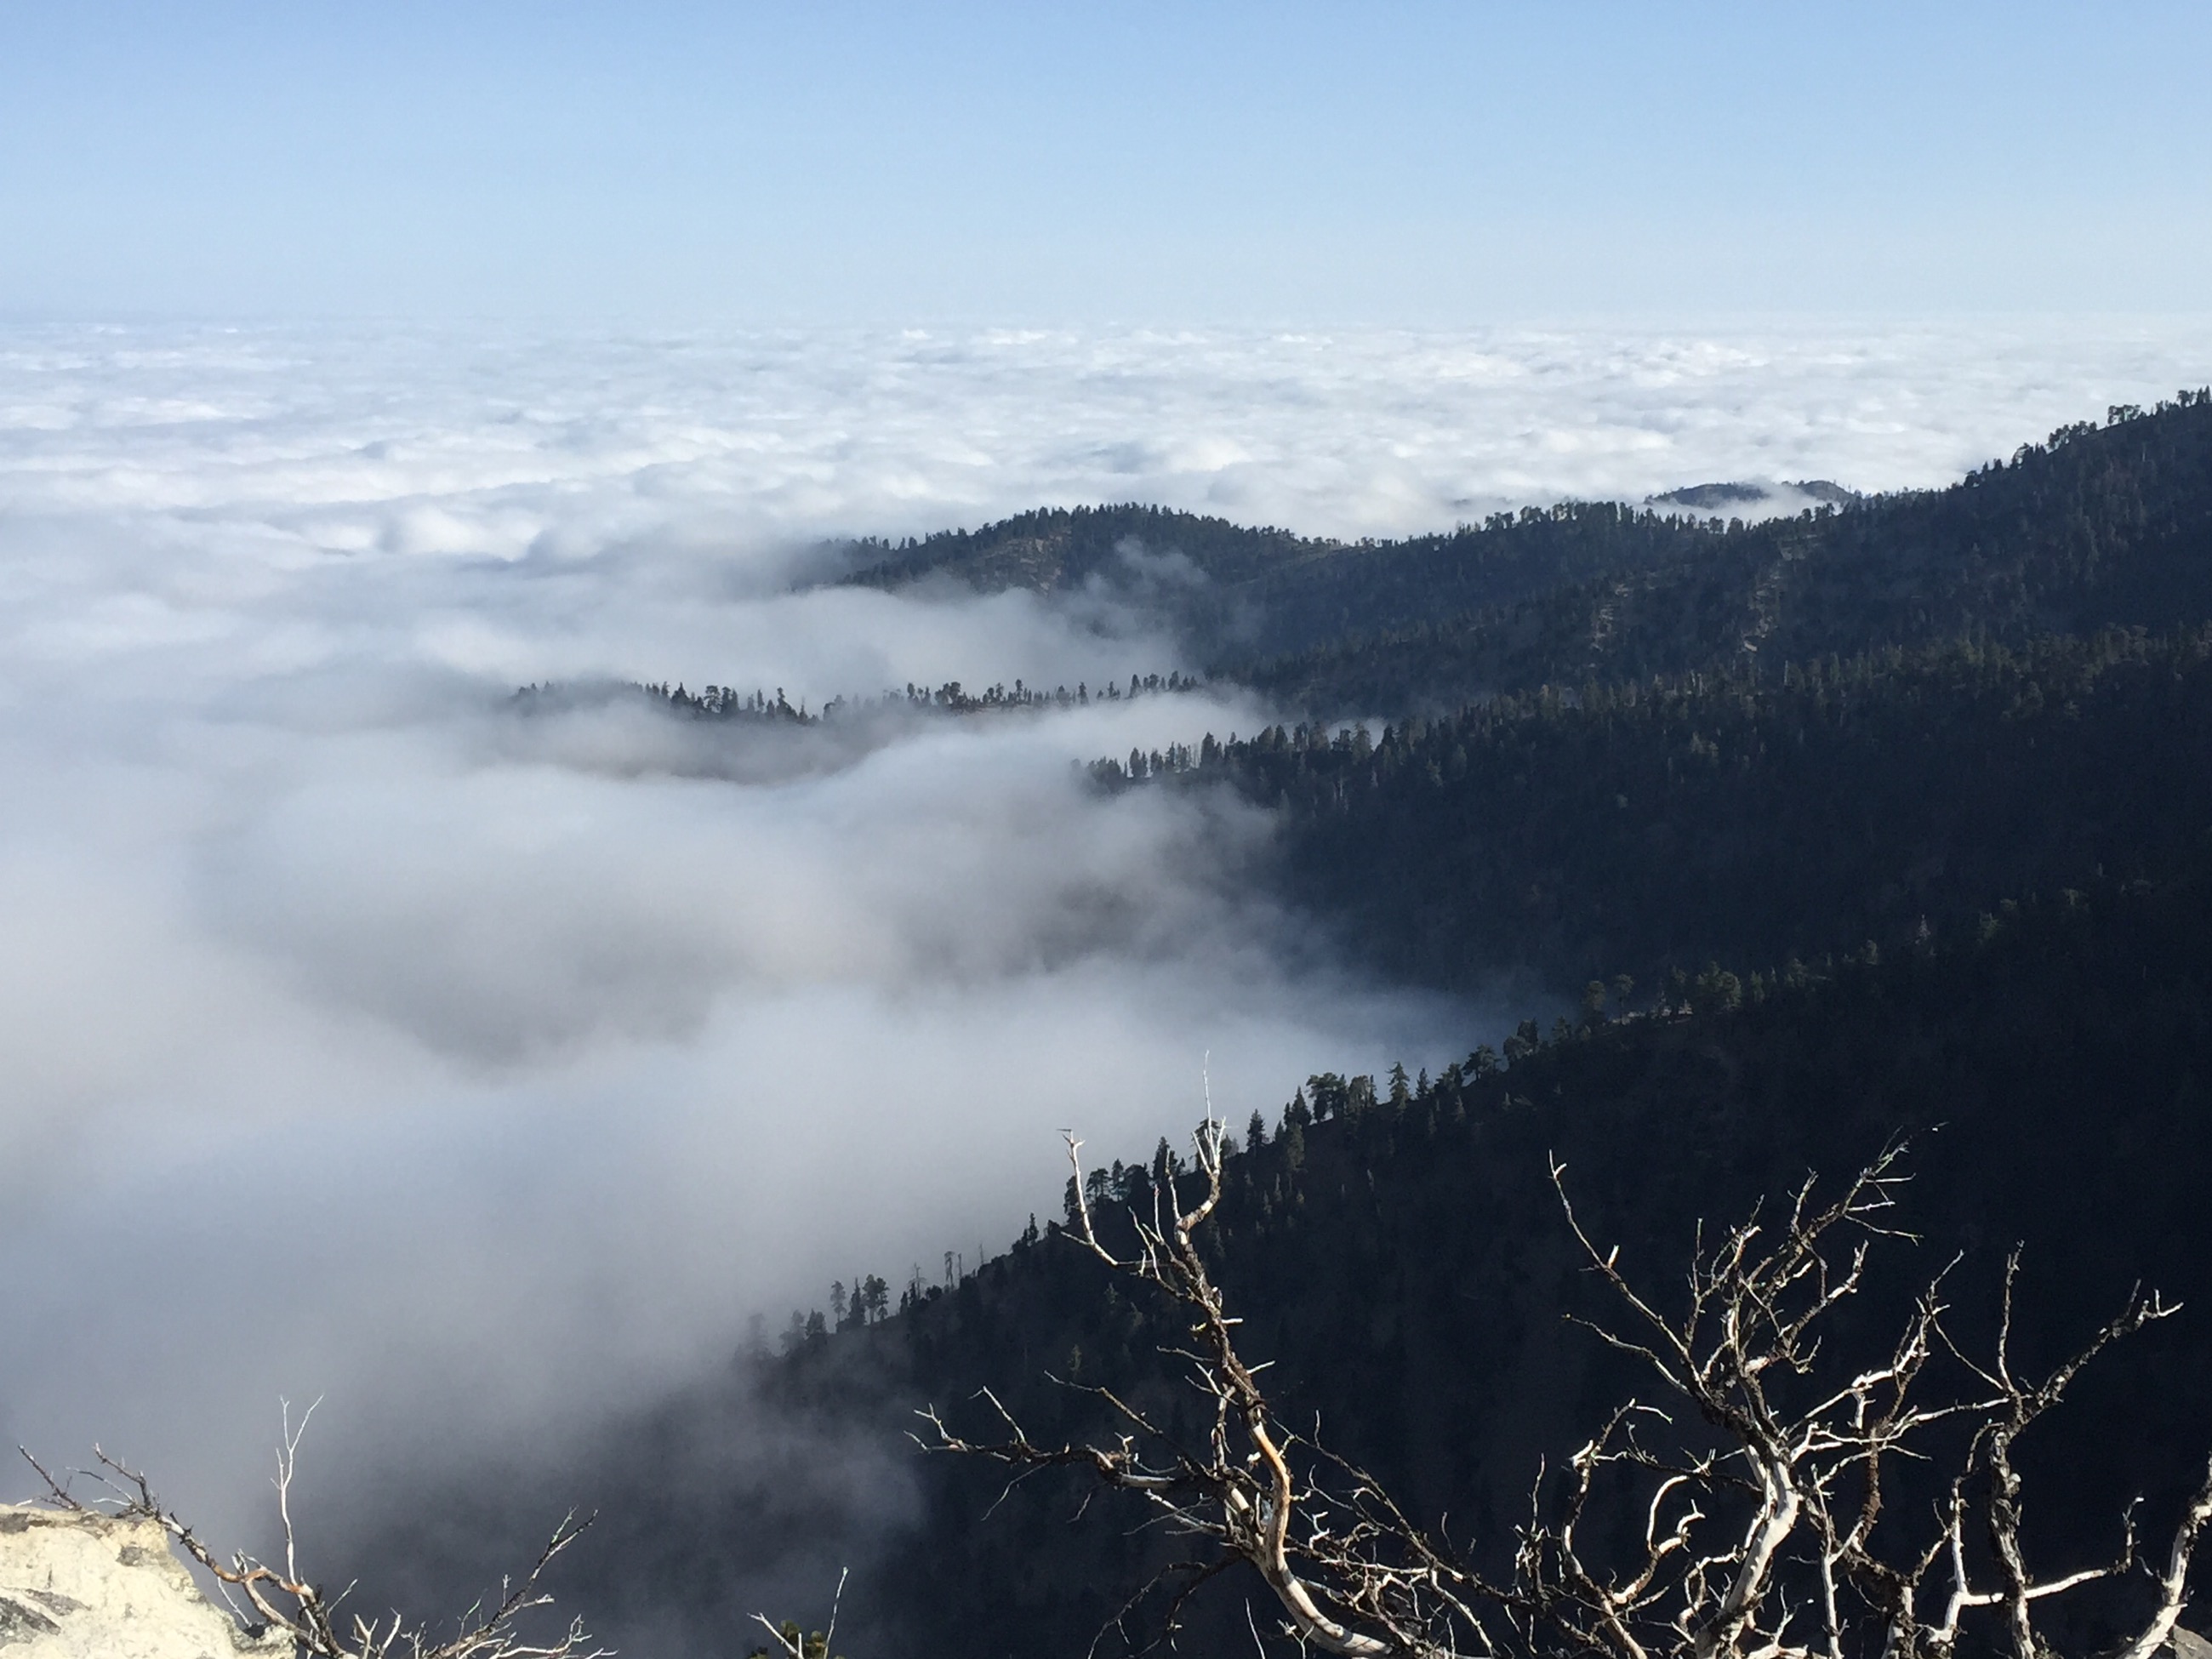 Day 29: High Above the Clouds